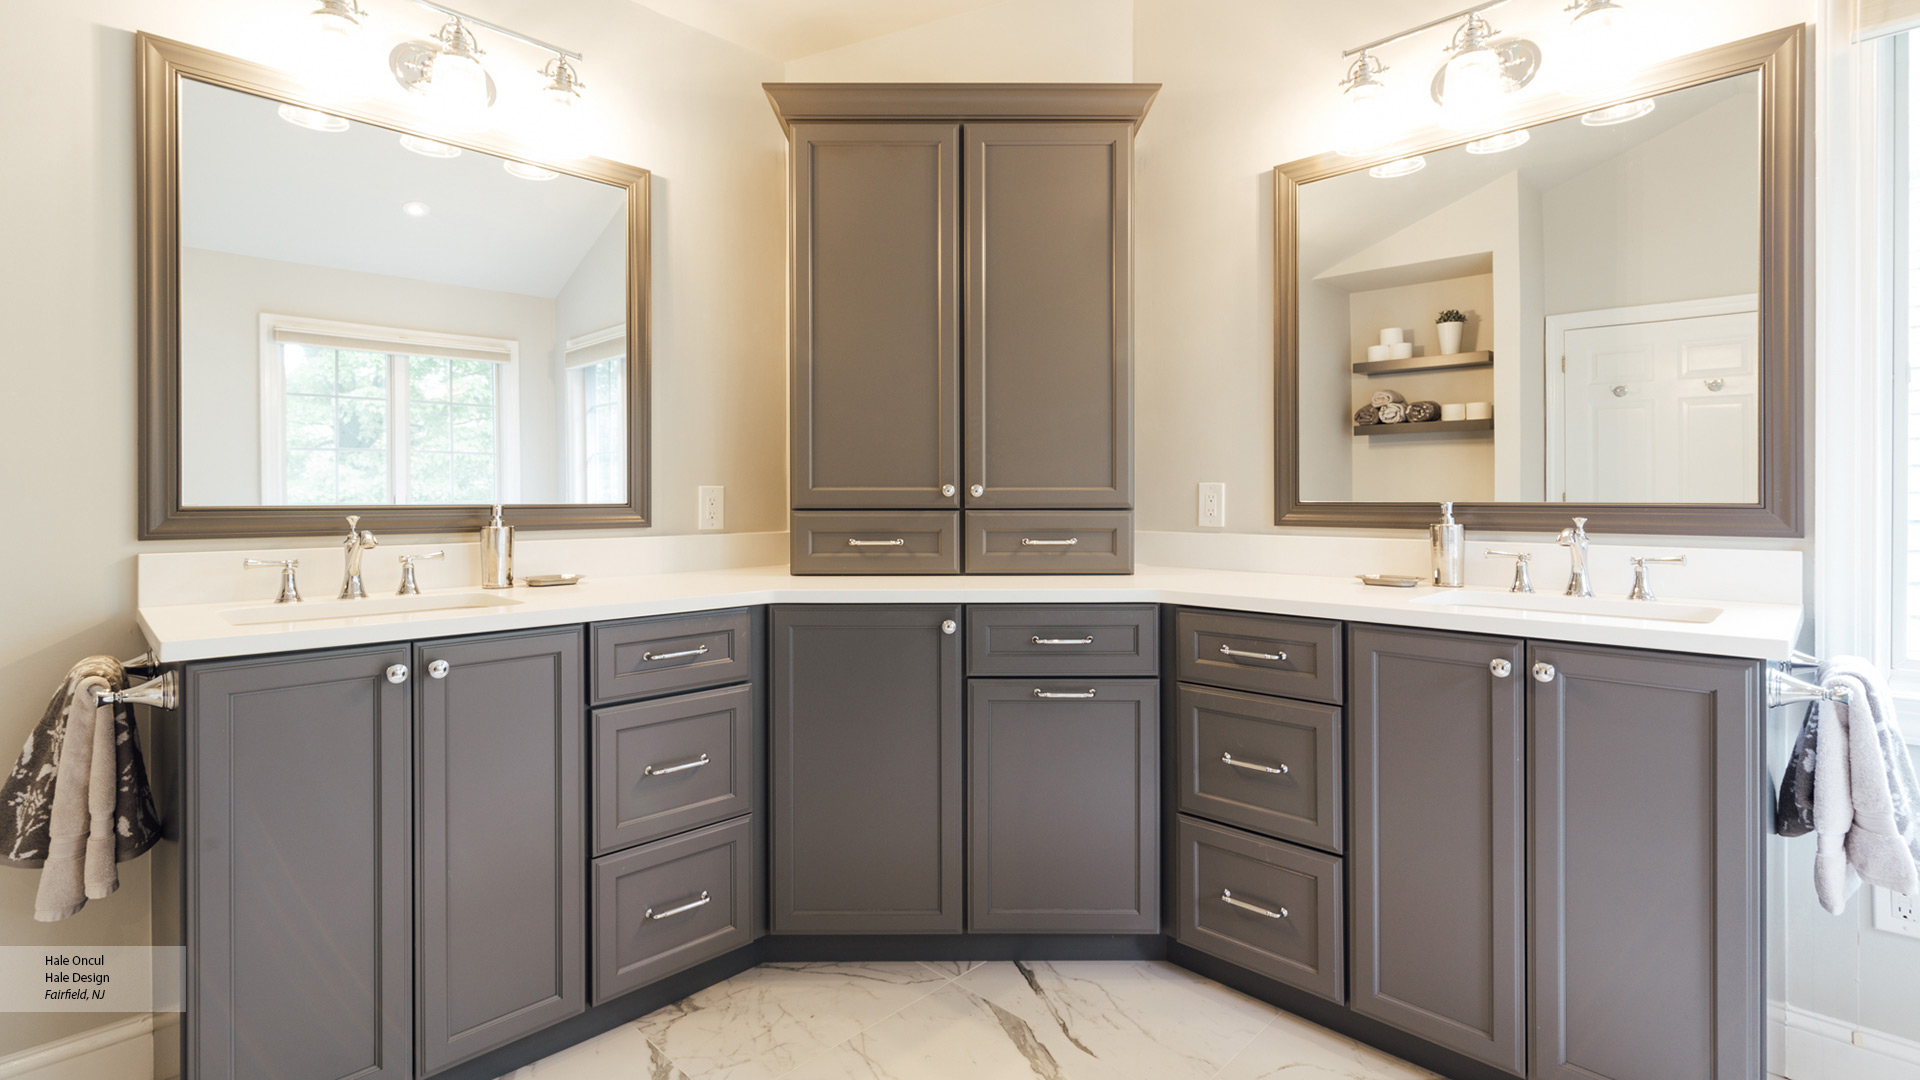 Kitchen Cabinets For A Bathroom Vanity